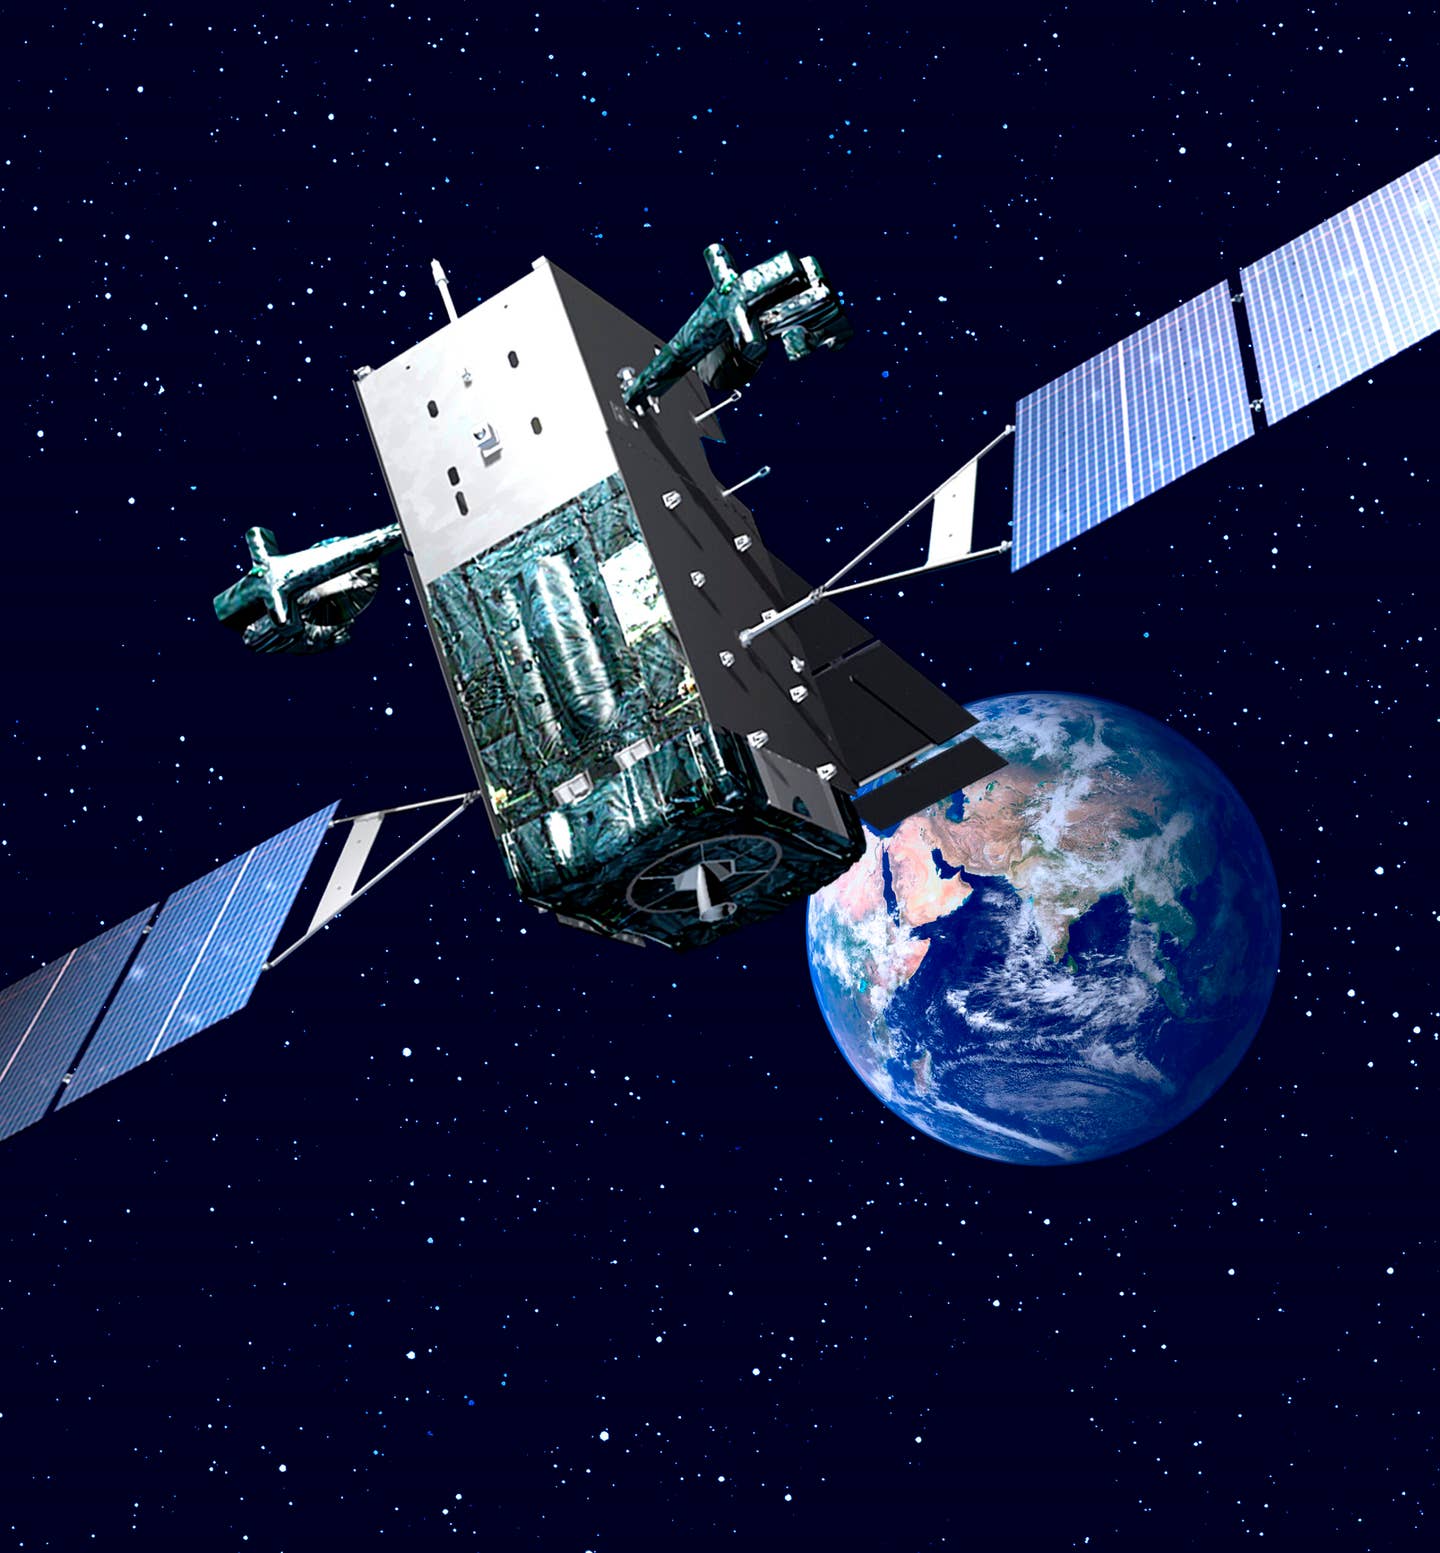 The new Tranche 1 Tracking Layer satellites will augment larger systems, like the SBIRS Missile Warning Satellite. (Lockheed Martin image)